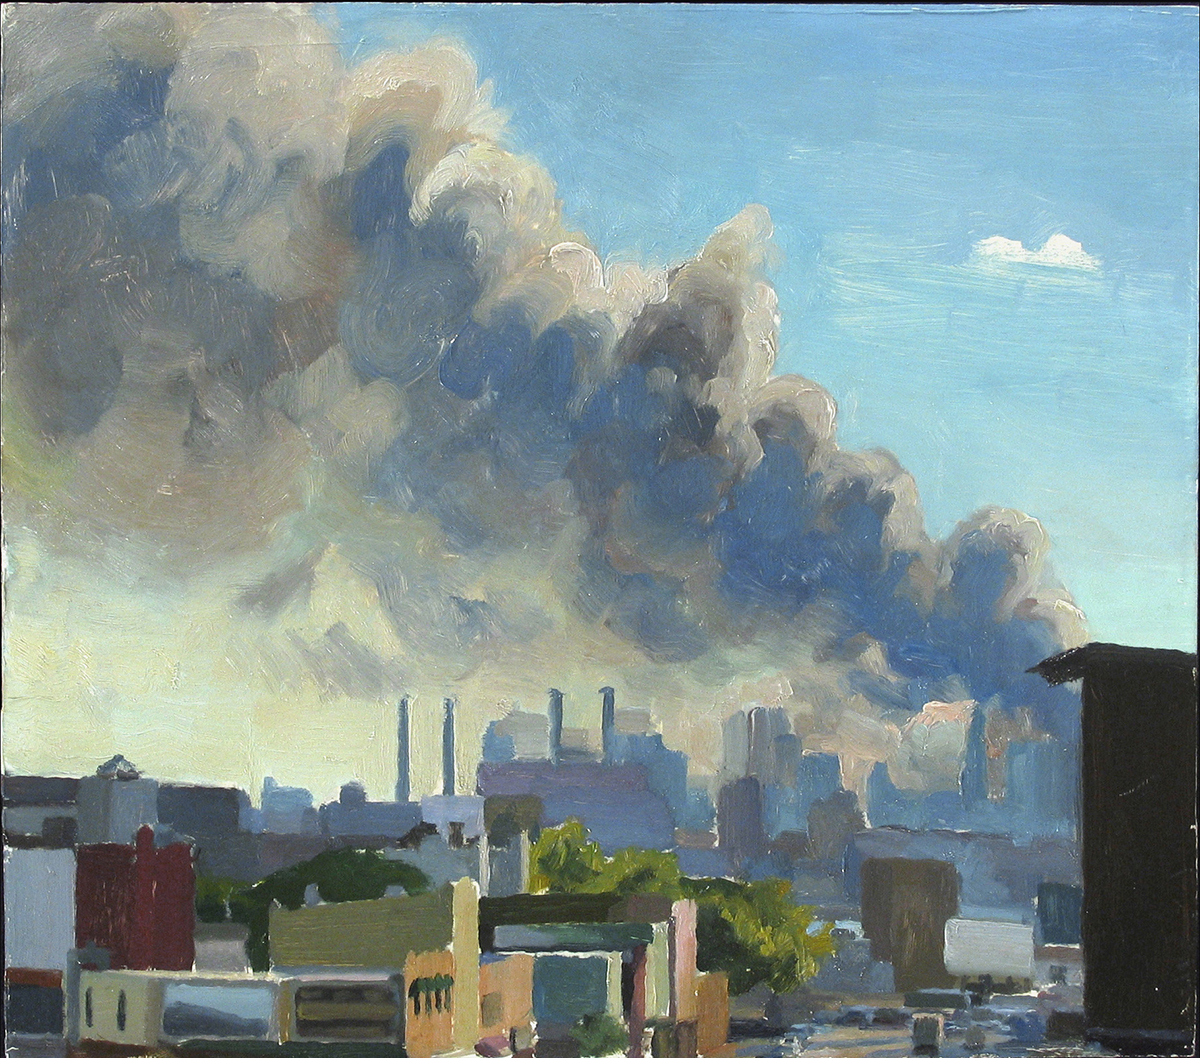  9/11: AFTERNOON oil on panel 14 x 16” 2001 